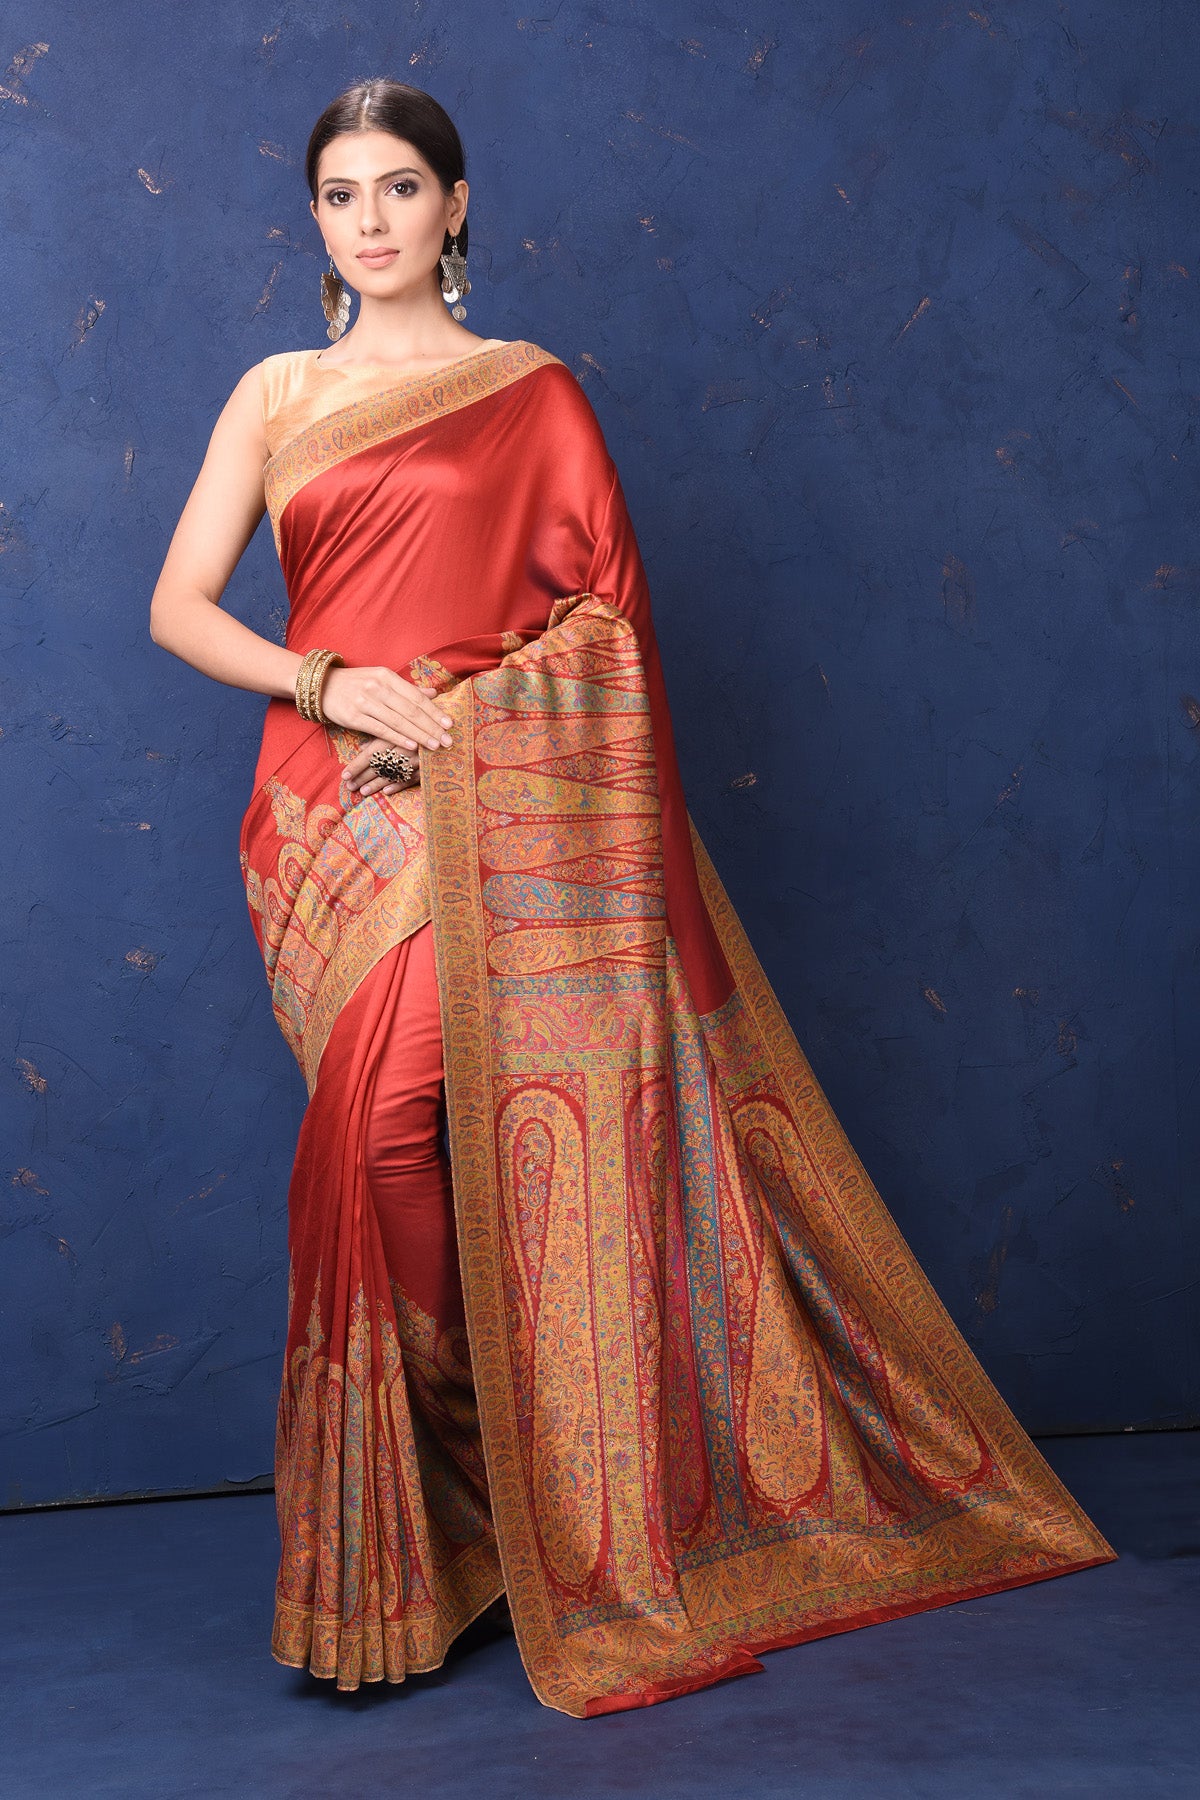 Buy gorgeous red tussar muga silk saree online in USA with Kani border. Buy latest designer sarees, handloom saris, embroidered sarees, Bollywood sarees, fancy sarees for special occasions from Pure Elegance Indian fashion store in USA. Shop soft silk sarees, pure Banarasi sarees, cotton sarees, georgette sarees. -full view